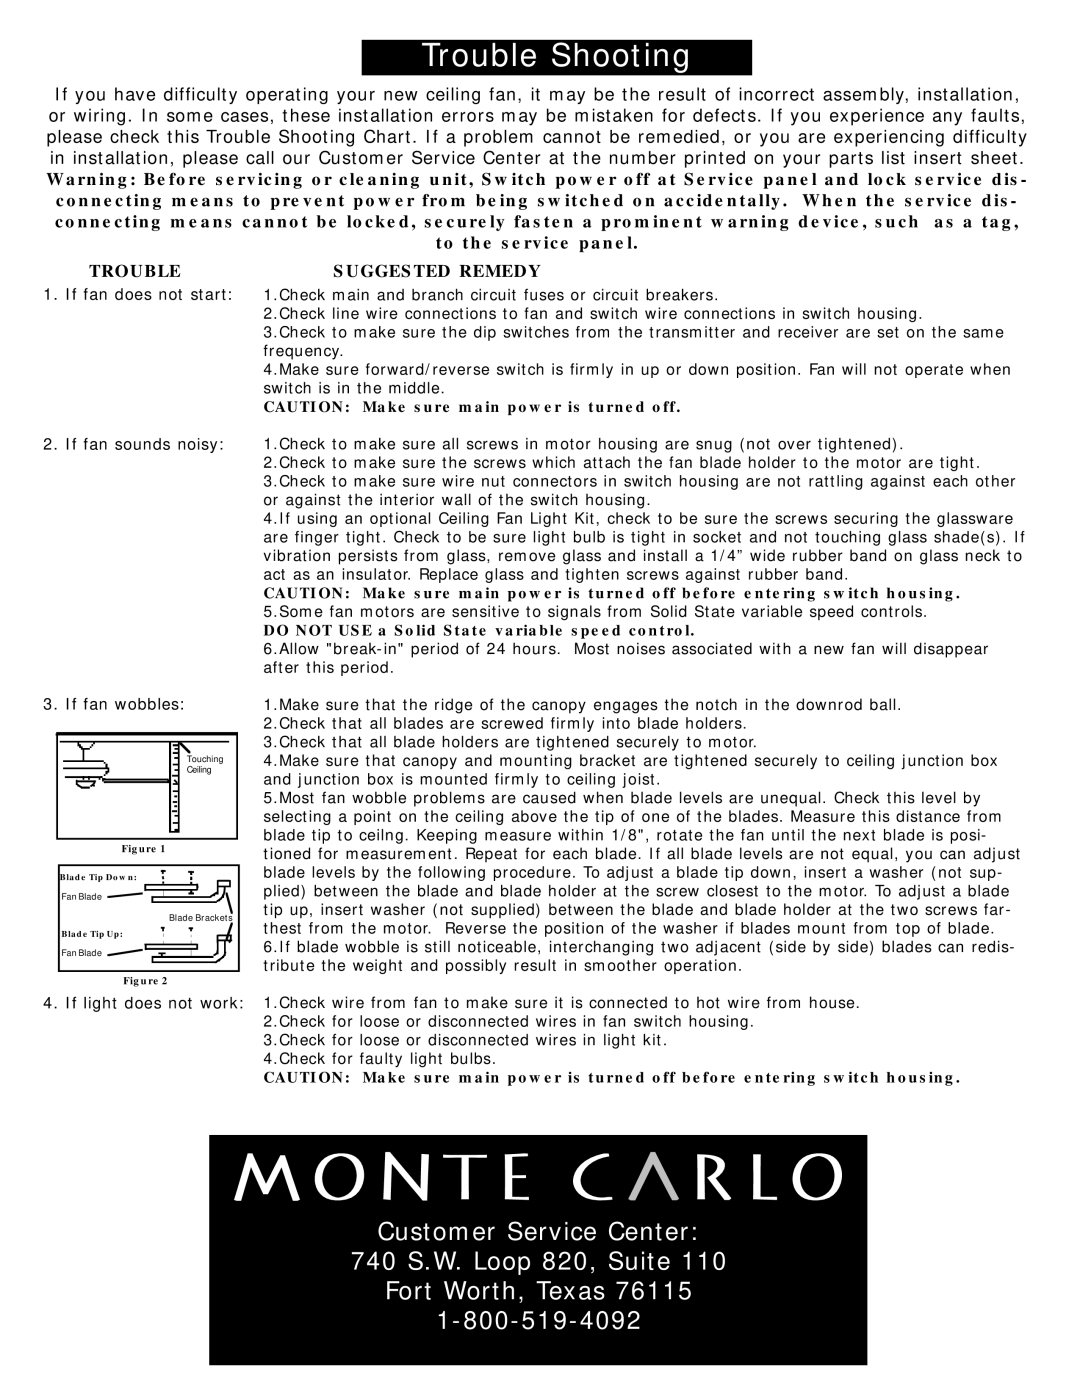 Monte Carlo Fan Company 5WFXX owner manual Customer Service Center 740 S.W. Loop 820, Suite 